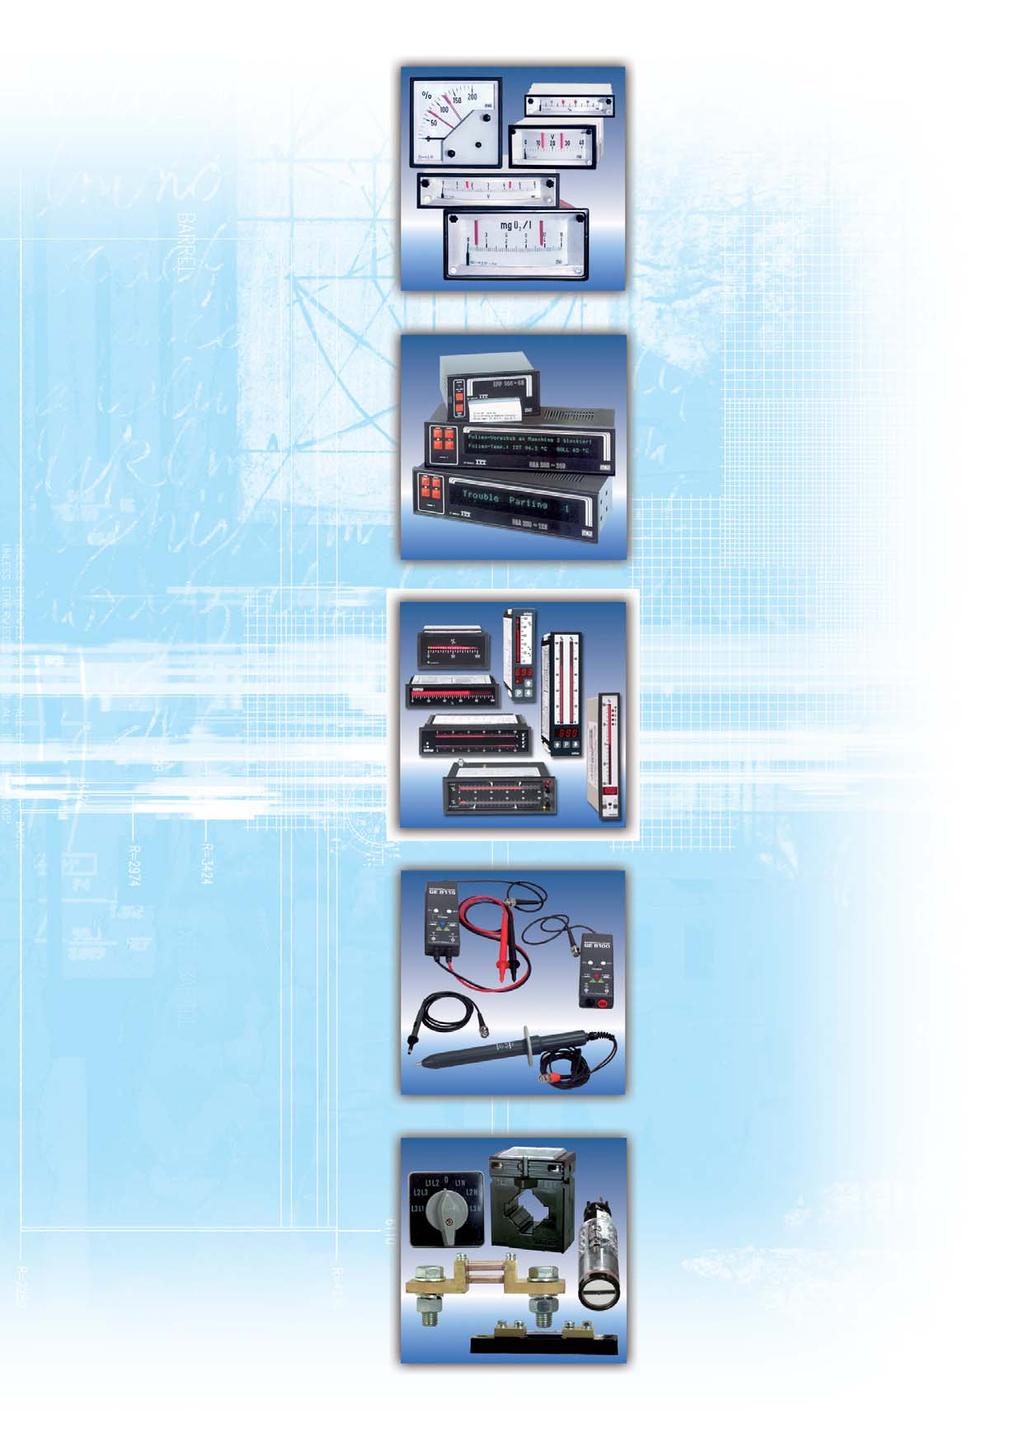 Contact devices For all electrical values Pt 100 and thermocouples 1 or 2 limit values Quiescent or operating current switching 7 housing sizes Text displays/printers 4 different versions 1 and 2